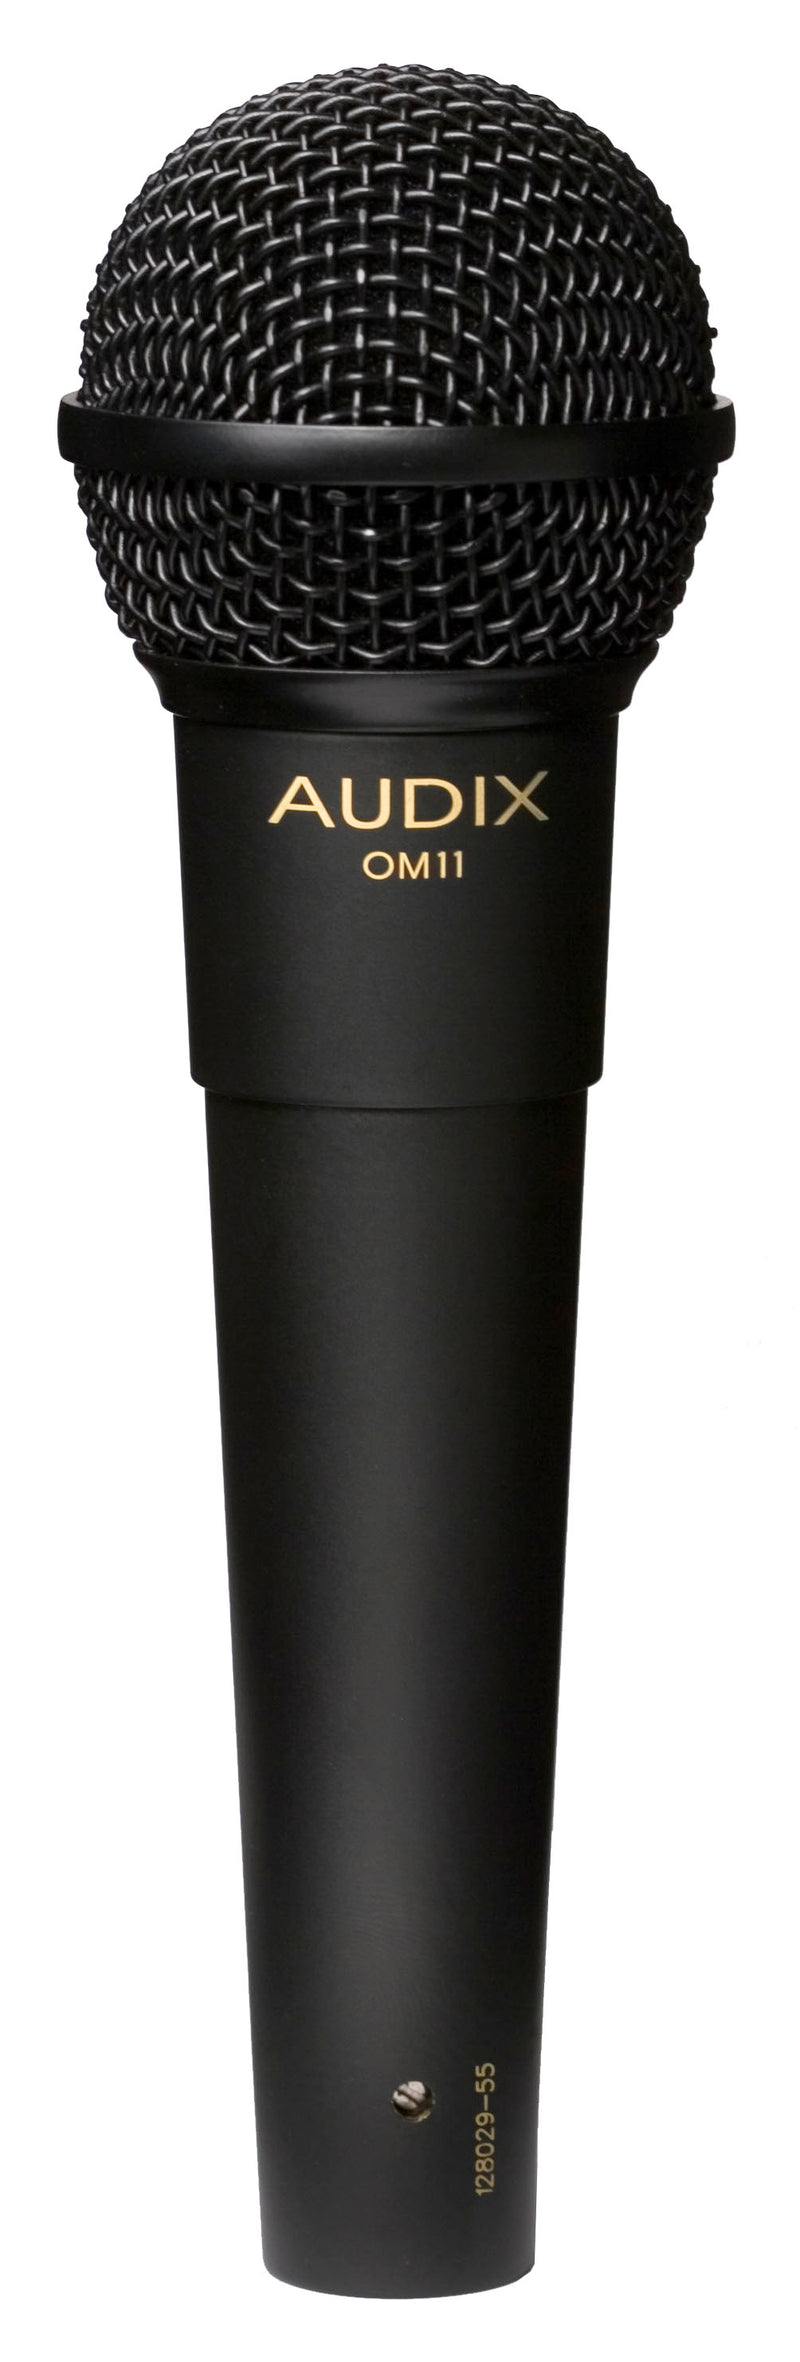 🇺🇸 Audix OM11 Dynamic Vocal Microphone Concert Level, Professional, Extremely Low Handling Noise